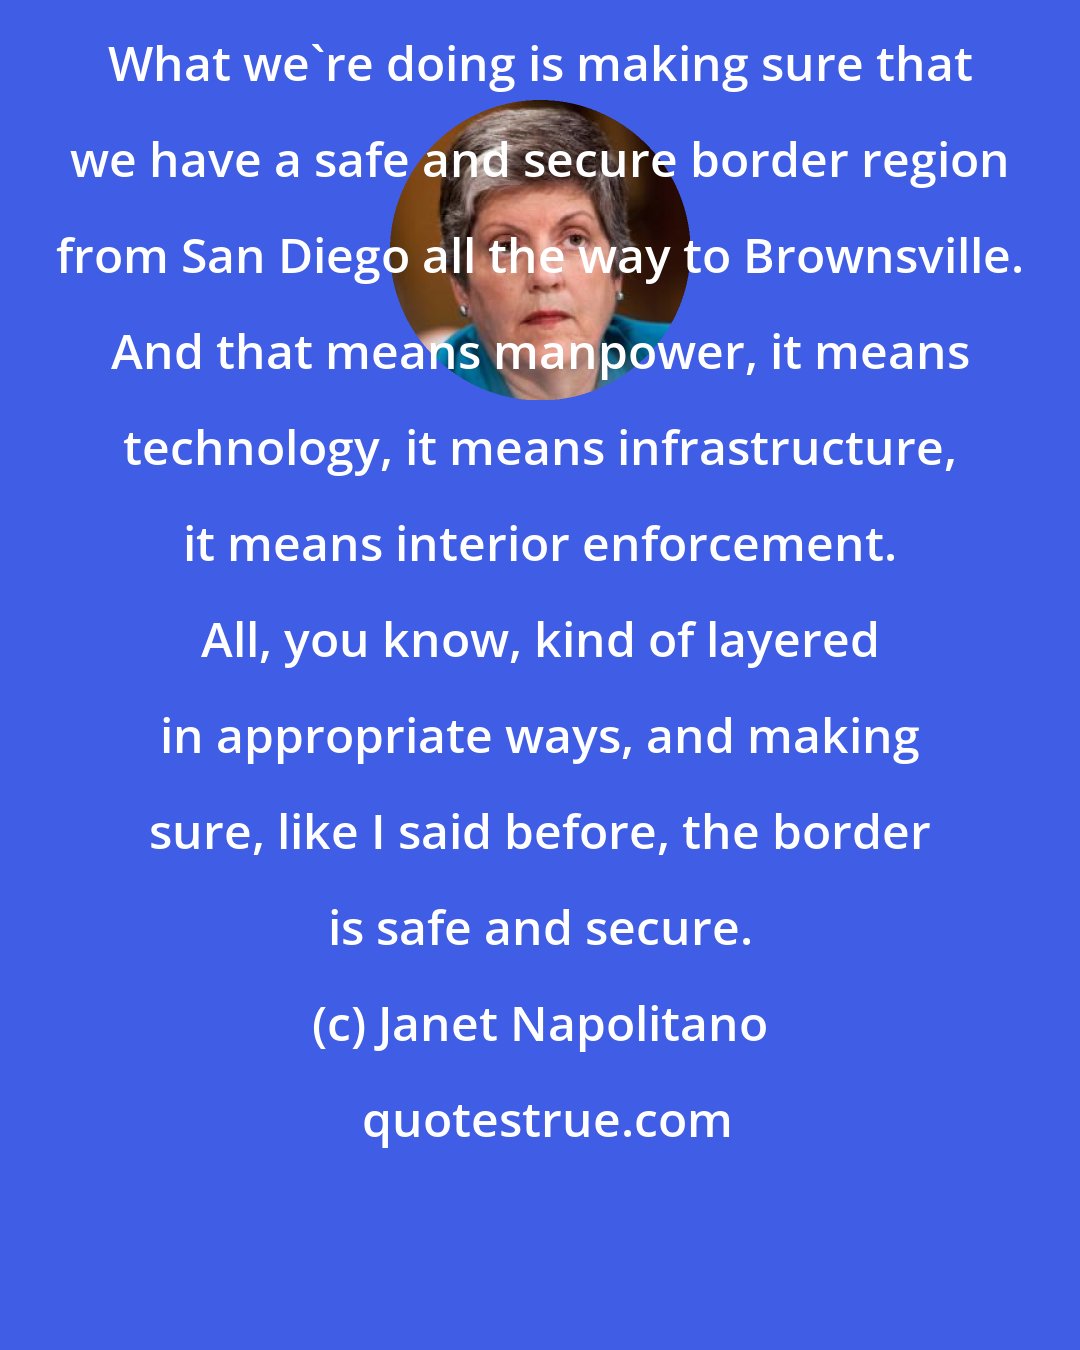 Janet Napolitano: What we're doing is making sure that we have a safe and secure border region from San Diego all the way to Brownsville. And that means manpower, it means technology, it means infrastructure, it means interior enforcement. All, you know, kind of layered in appropriate ways, and making sure, like I said before, the border is safe and secure.